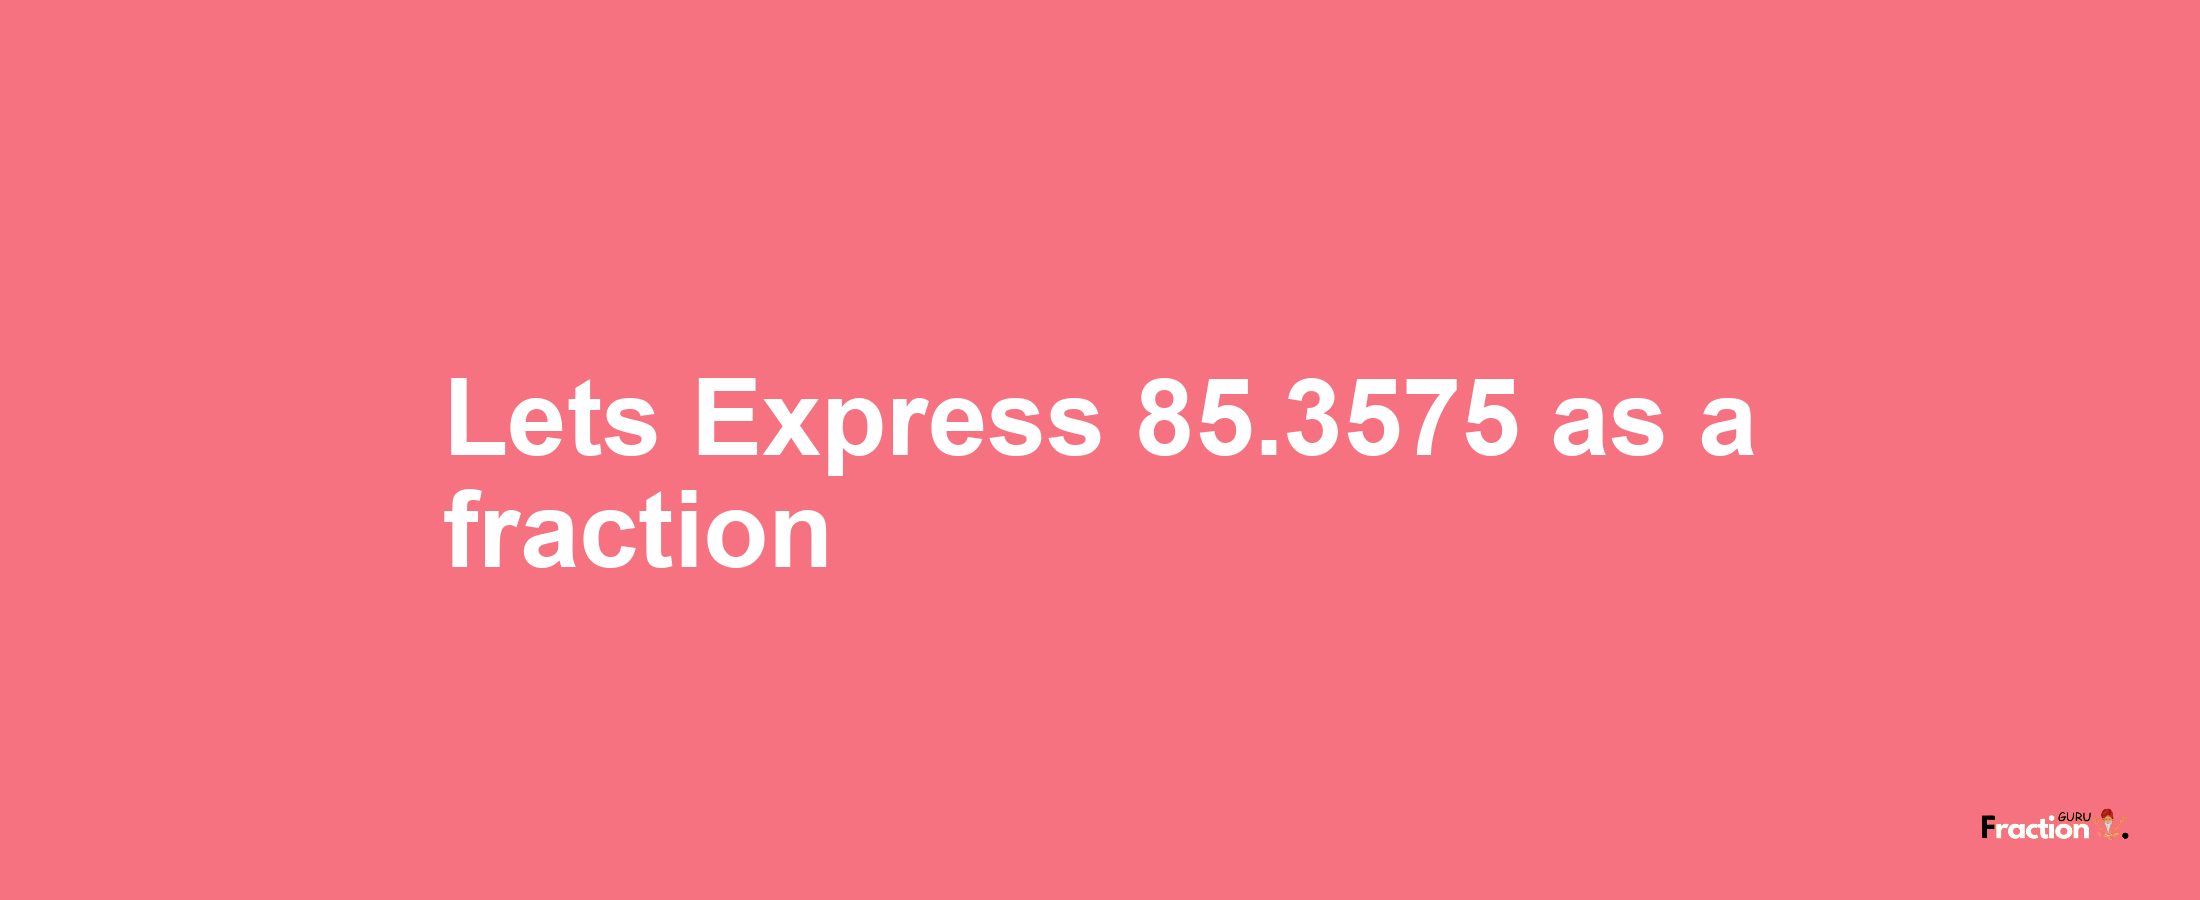 Lets Express 85.3575 as afraction